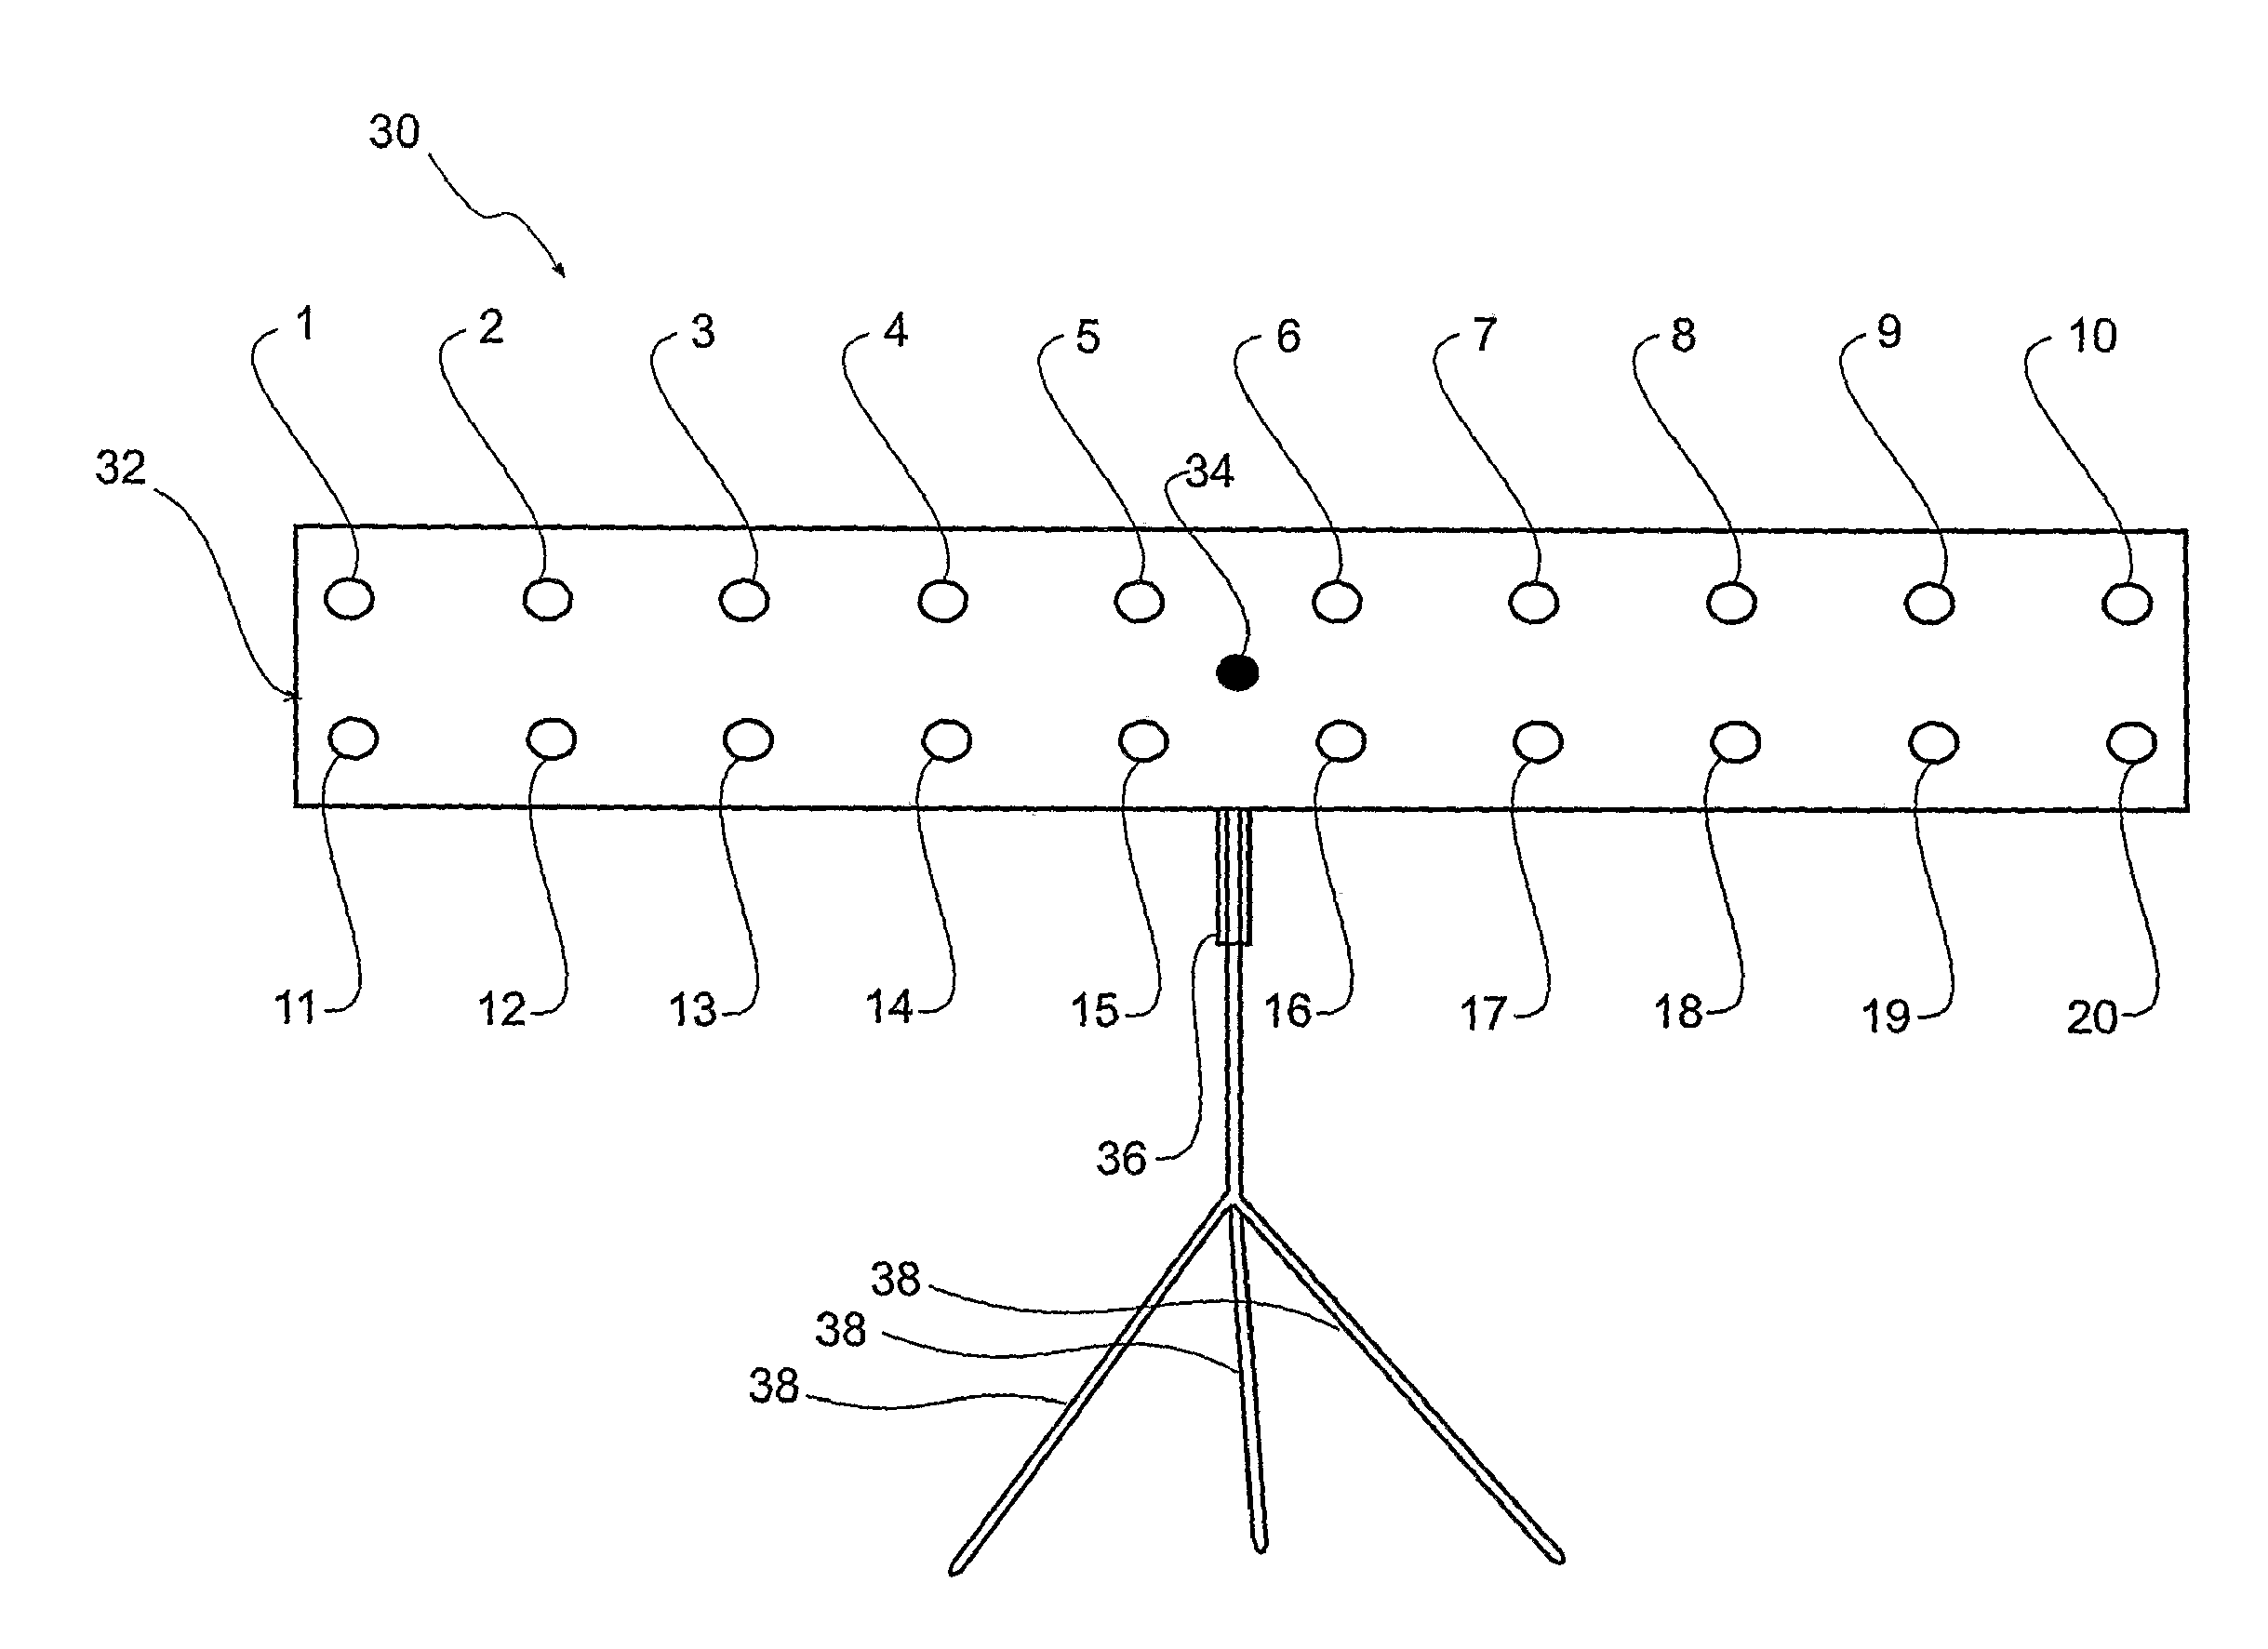 Apparatus and Method For Assement and Rehabilitation After Acquired Brain Injury